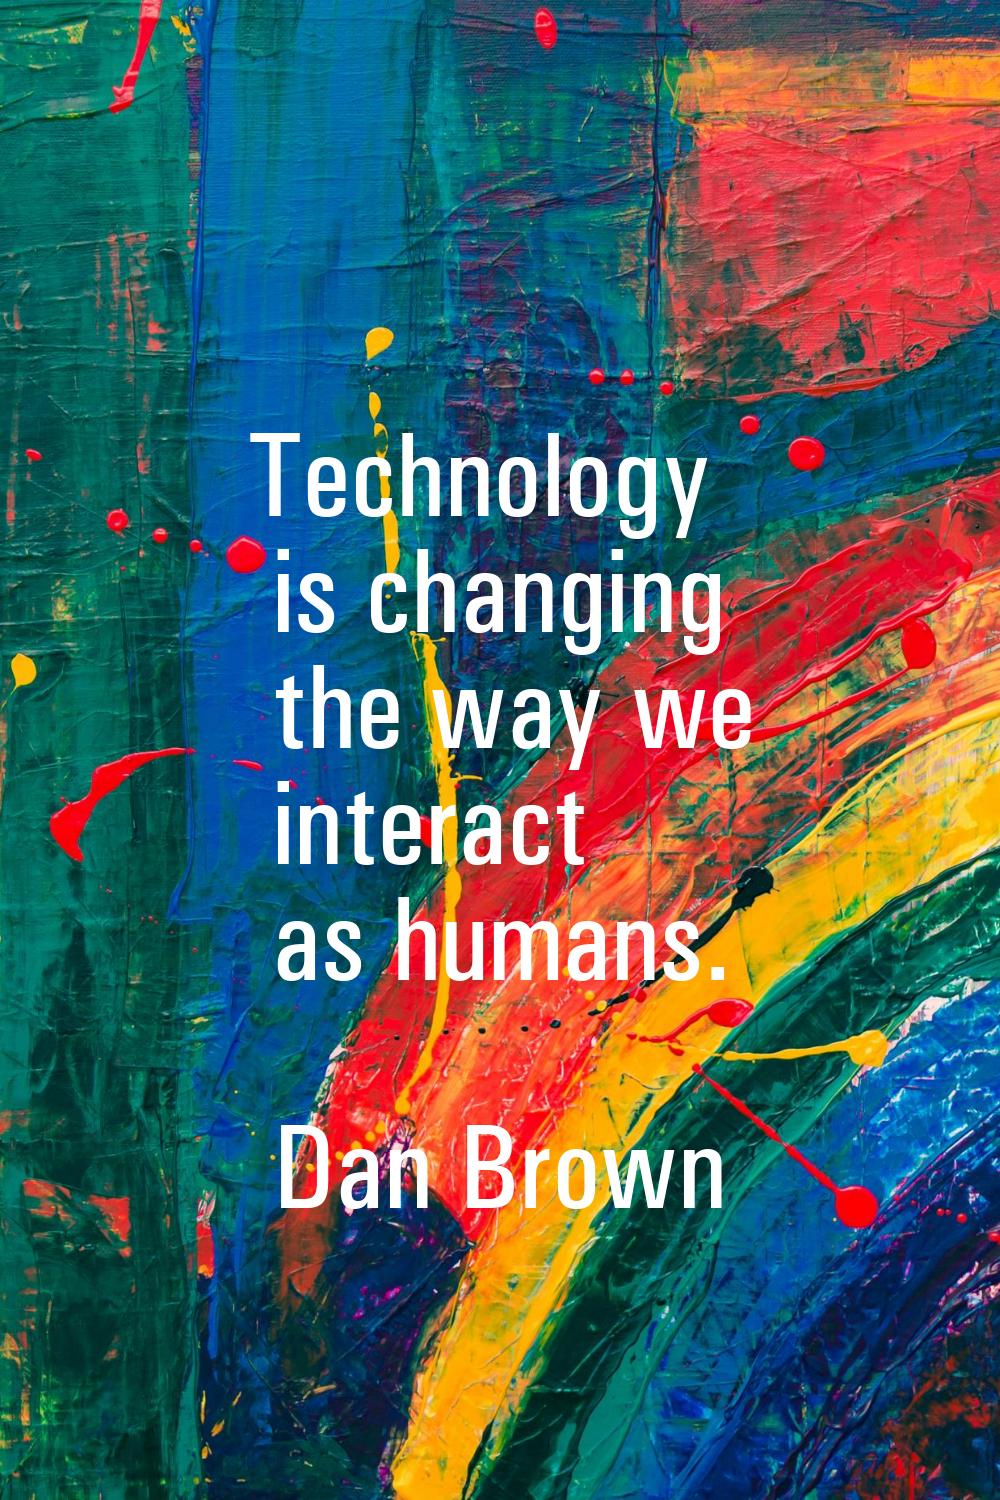 Technology is changing the way we interact as humans.